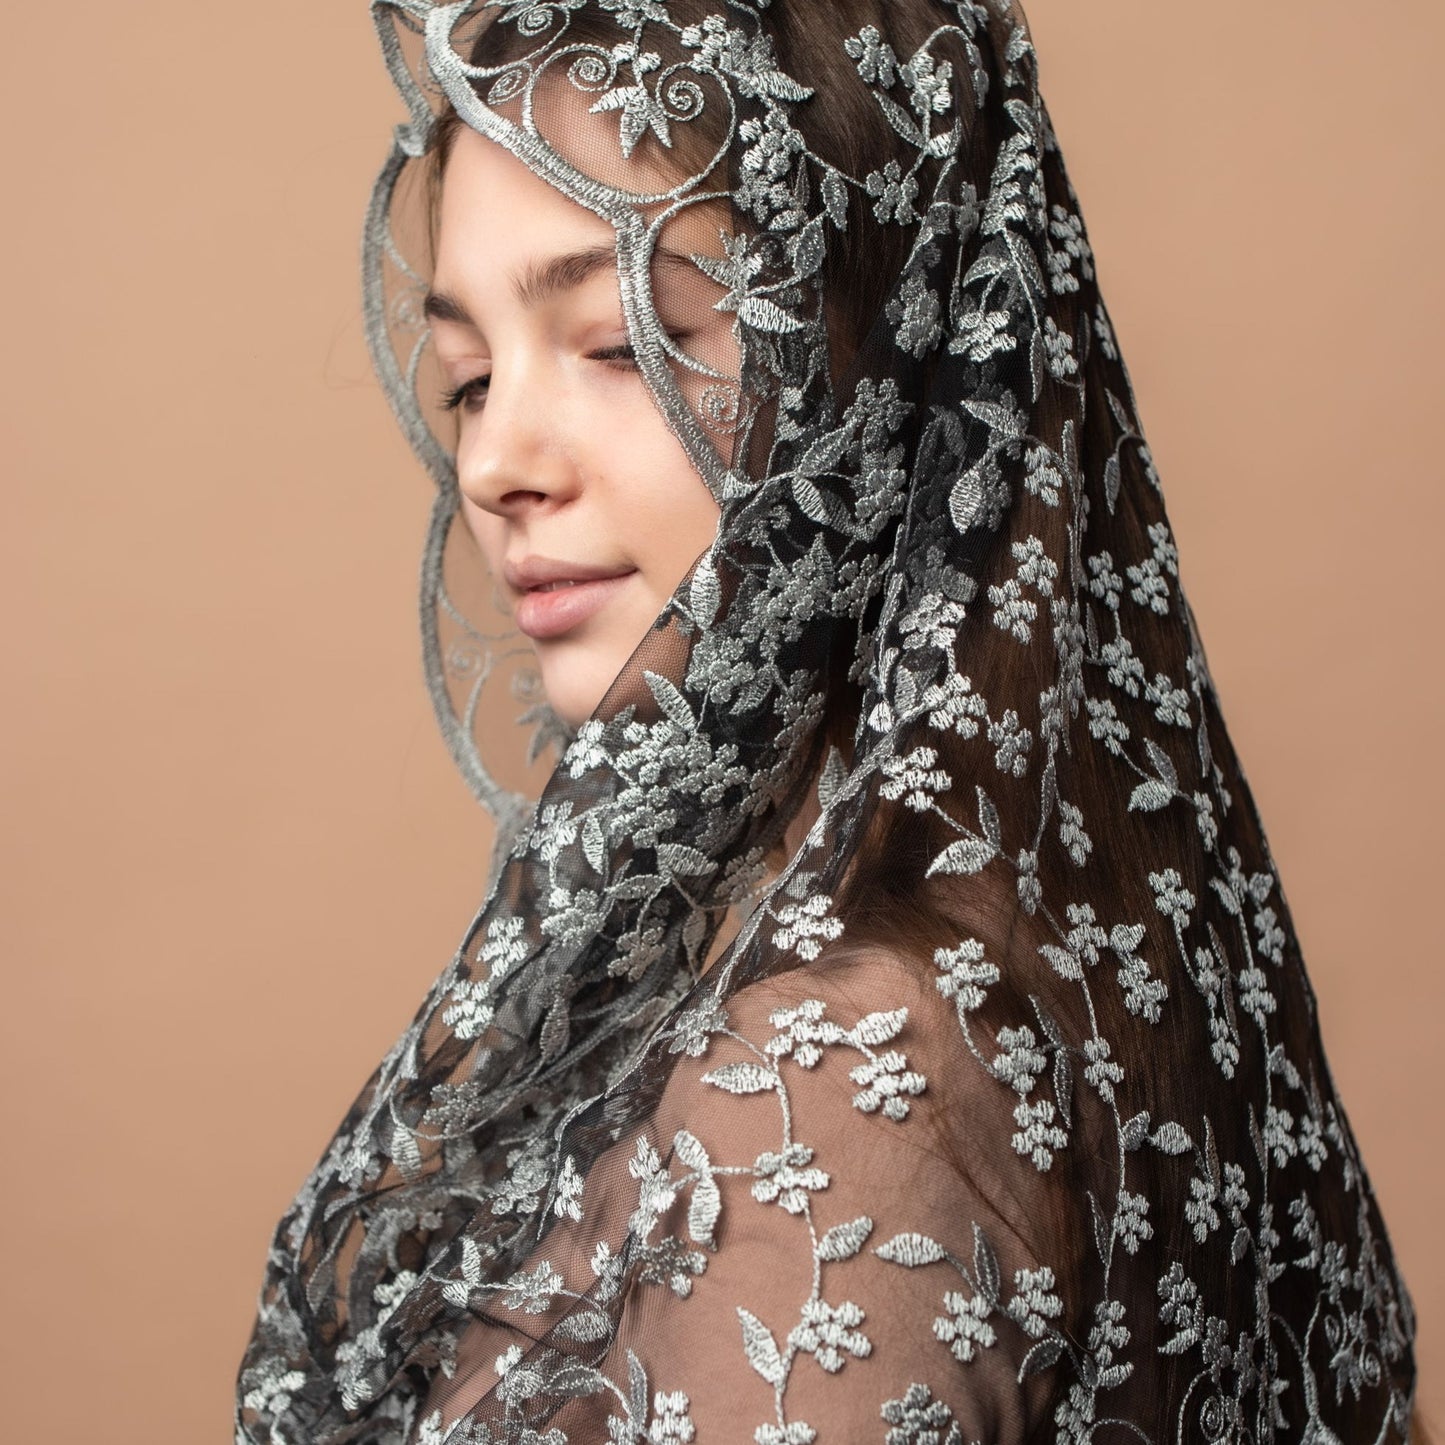 Infinity chapel veil with floral design - MariaVeils